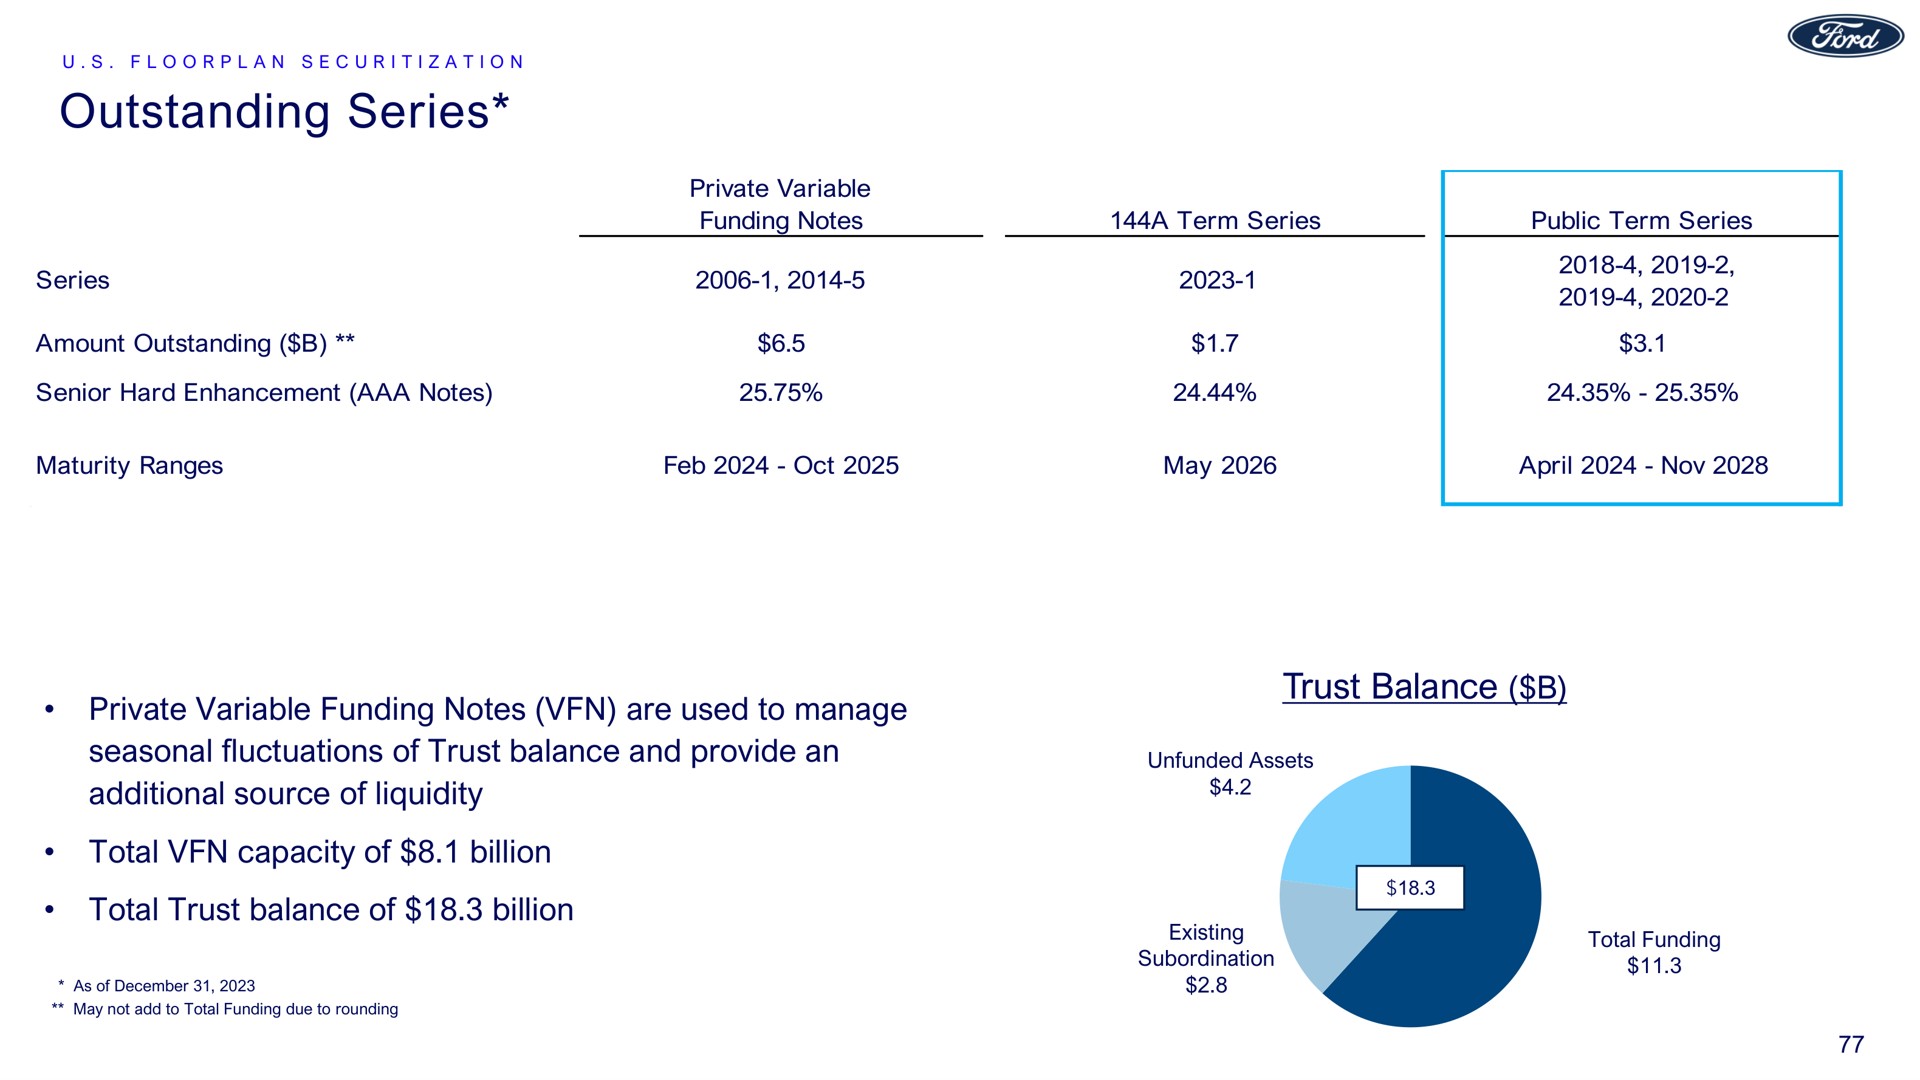 outstanding series private variable funding notes are used to manage seasonal fluctuations of trust balance and provide an additional source of liquidity trust balance total capacity of billion total trust balance of billion | Ford